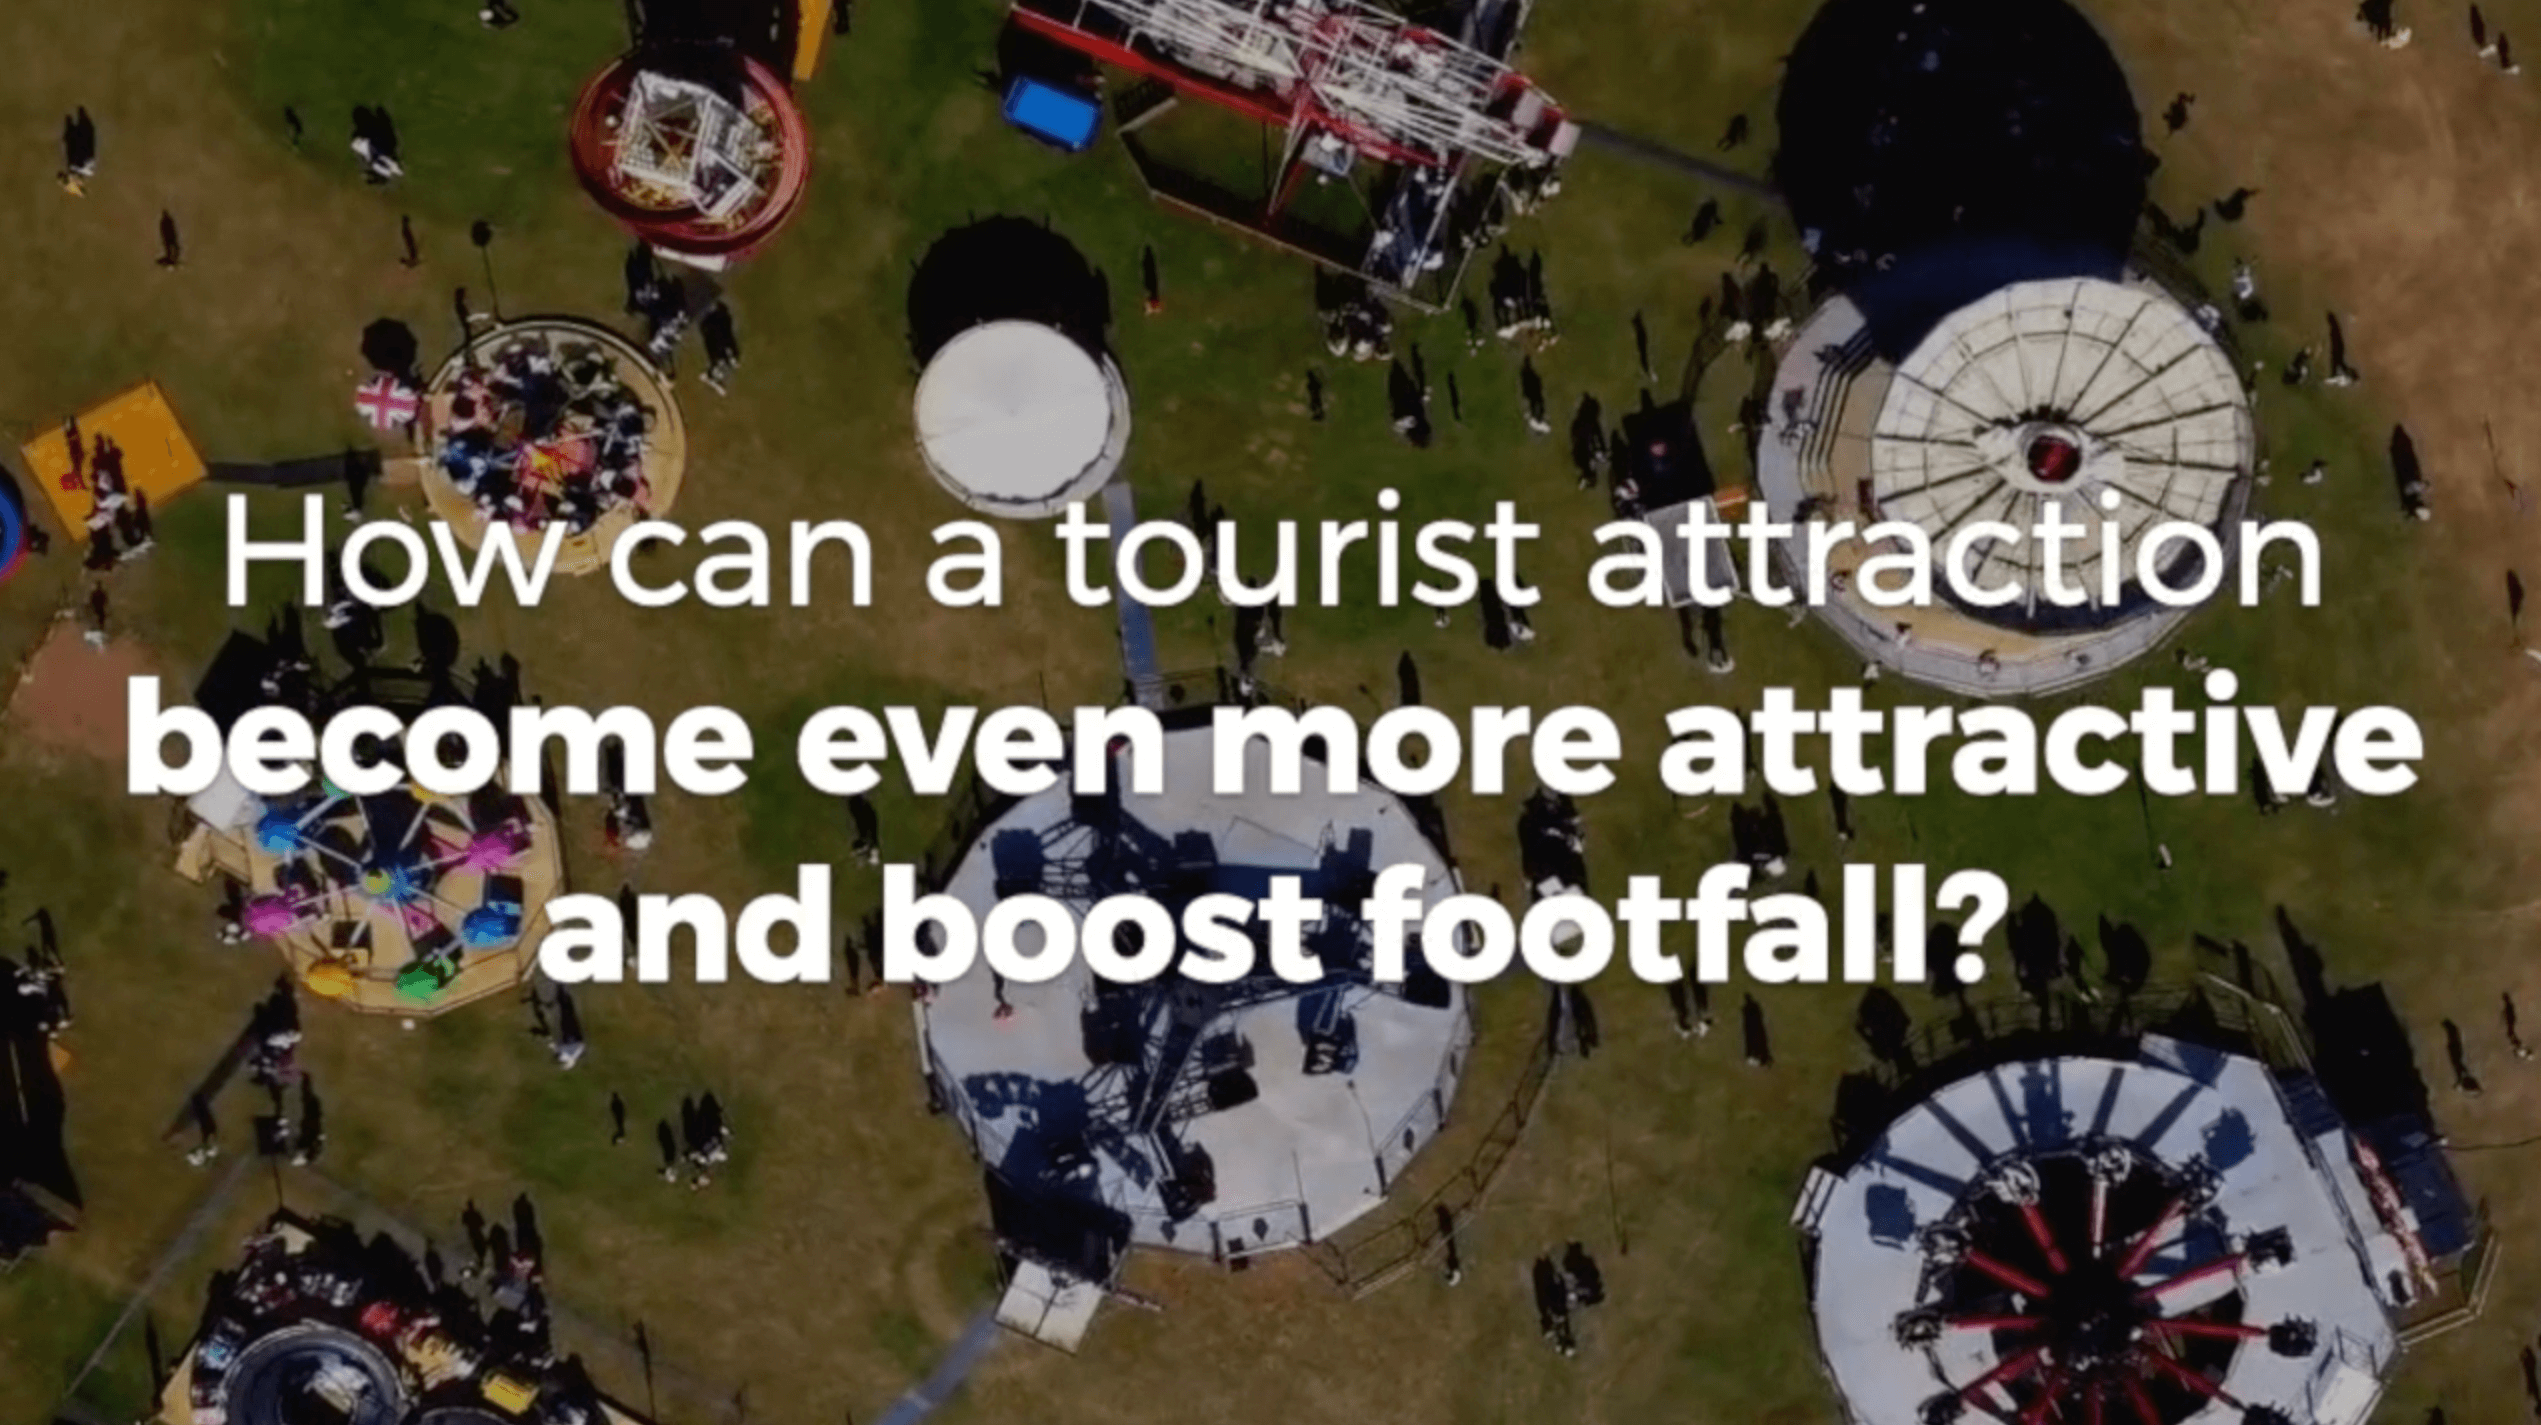 Video explaining how to make tourist attractions more attractive